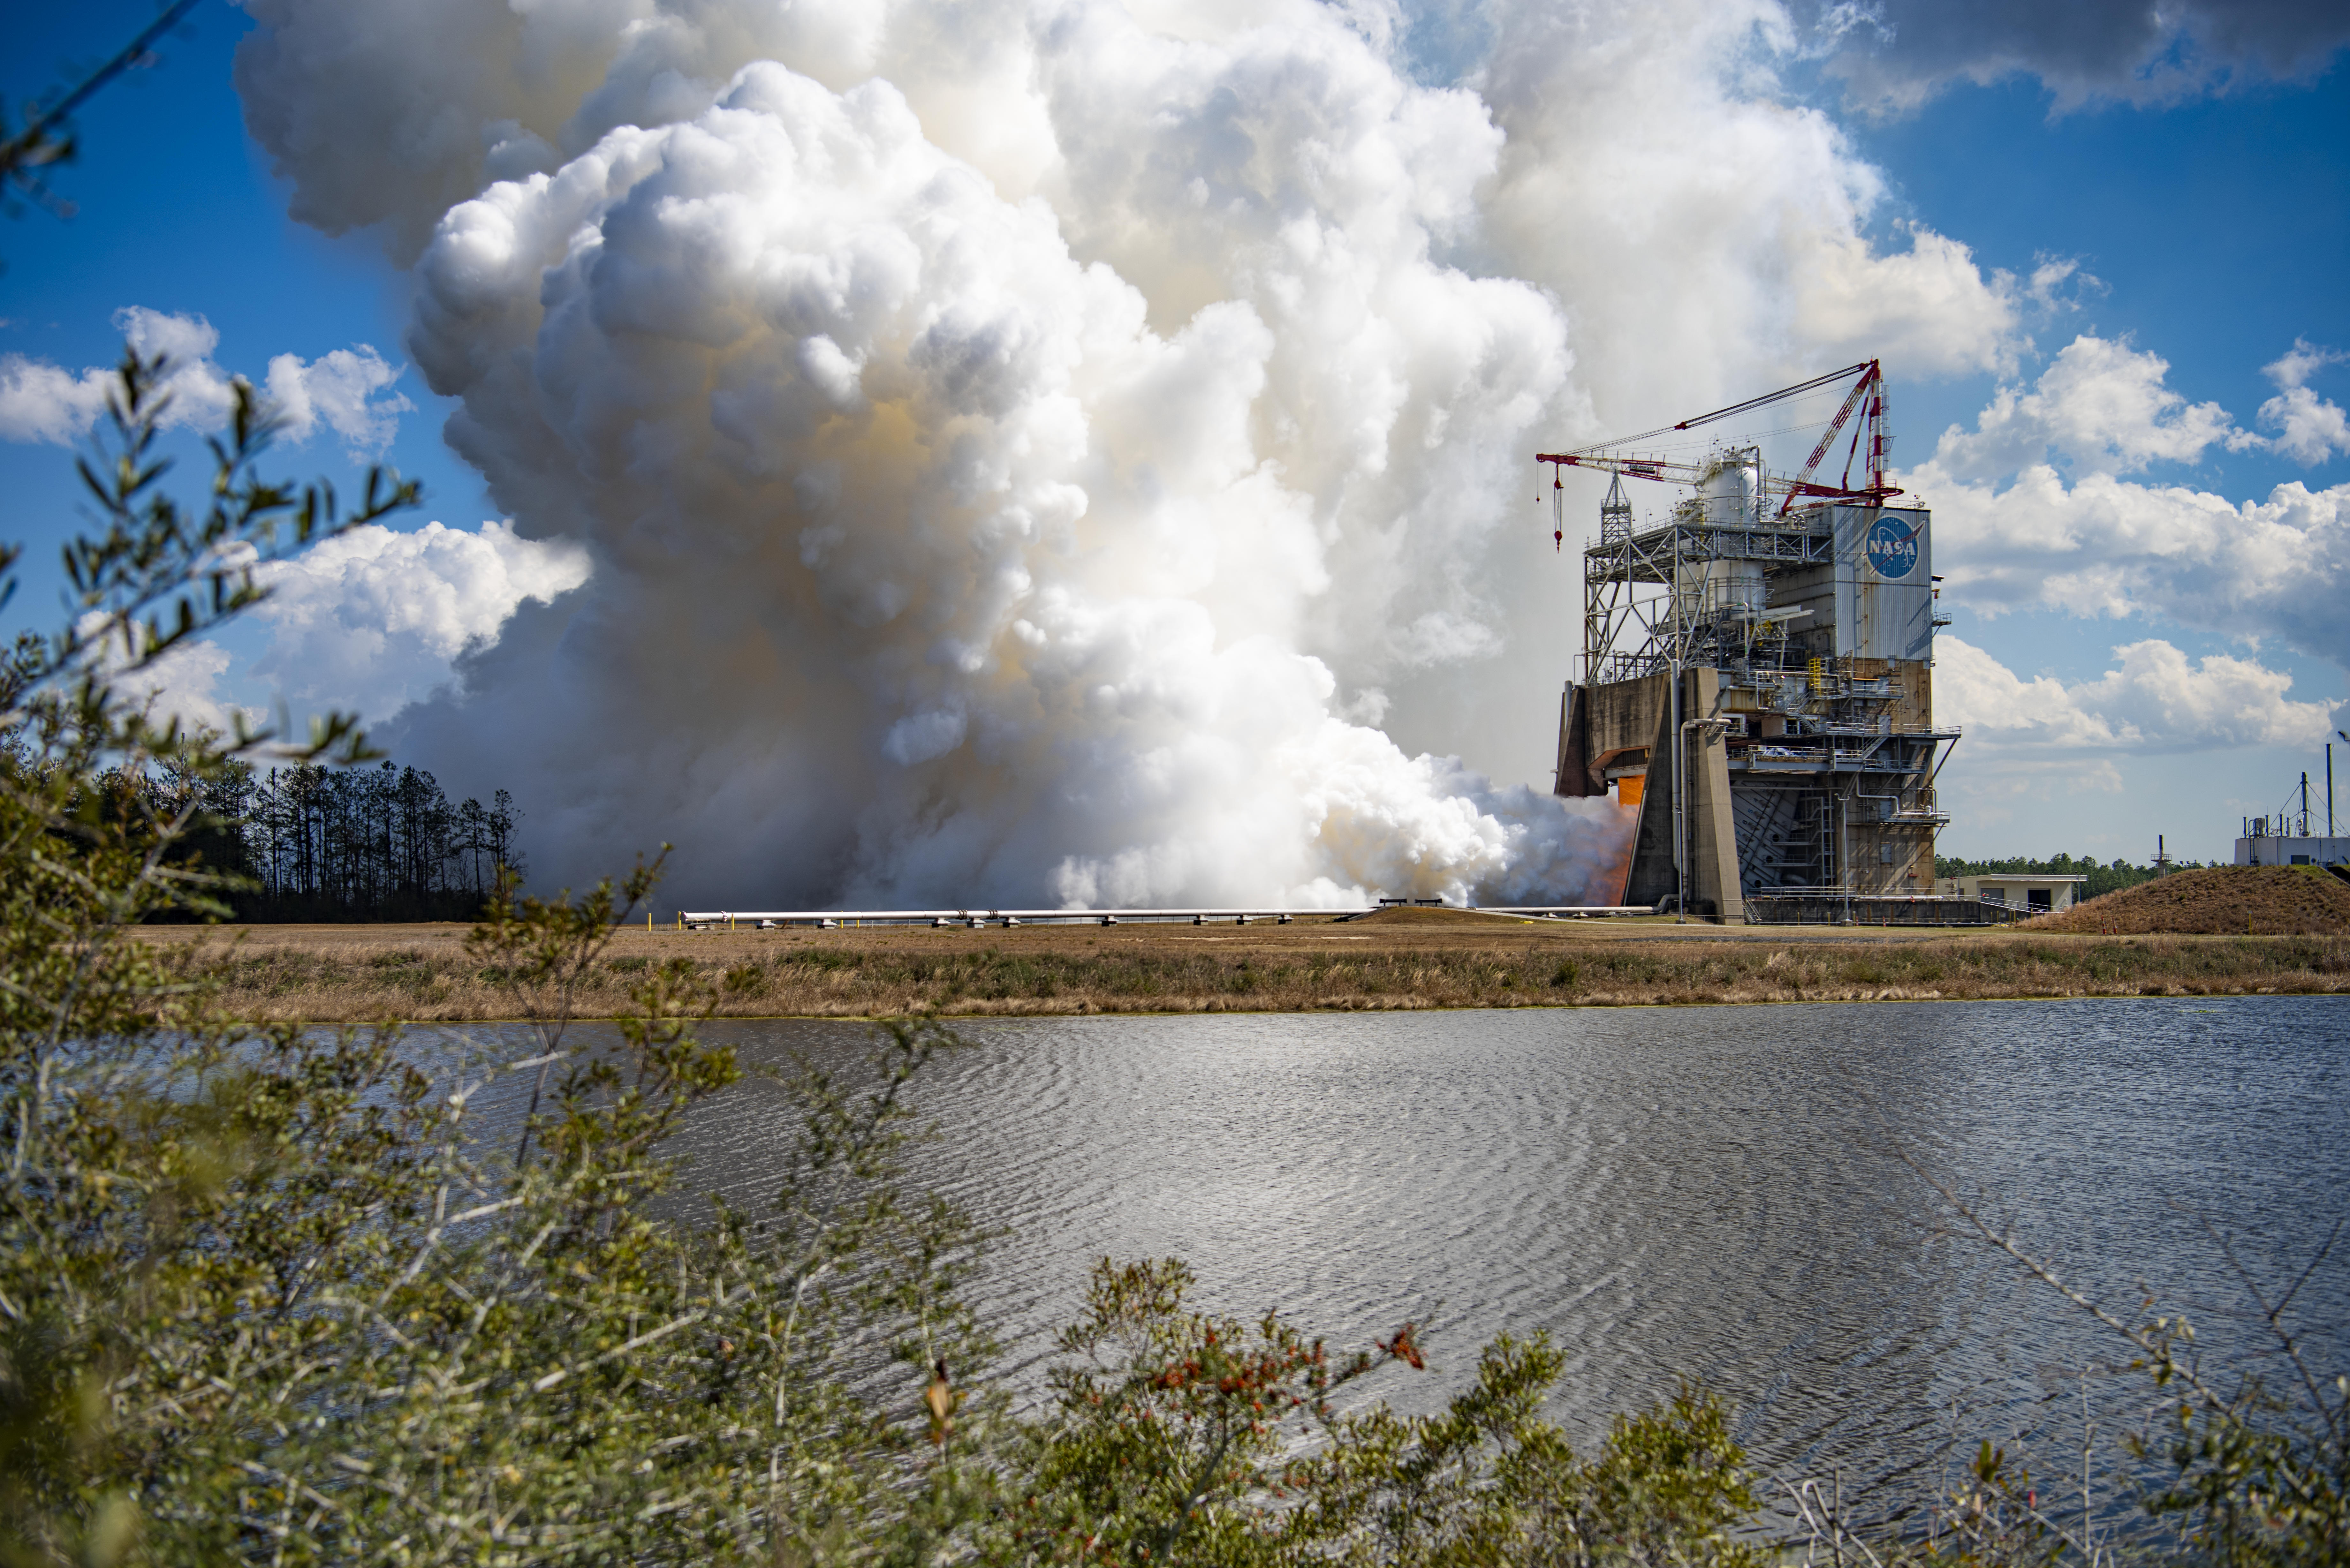 Operators fire RS-25 engine E0525 for 550 seconds